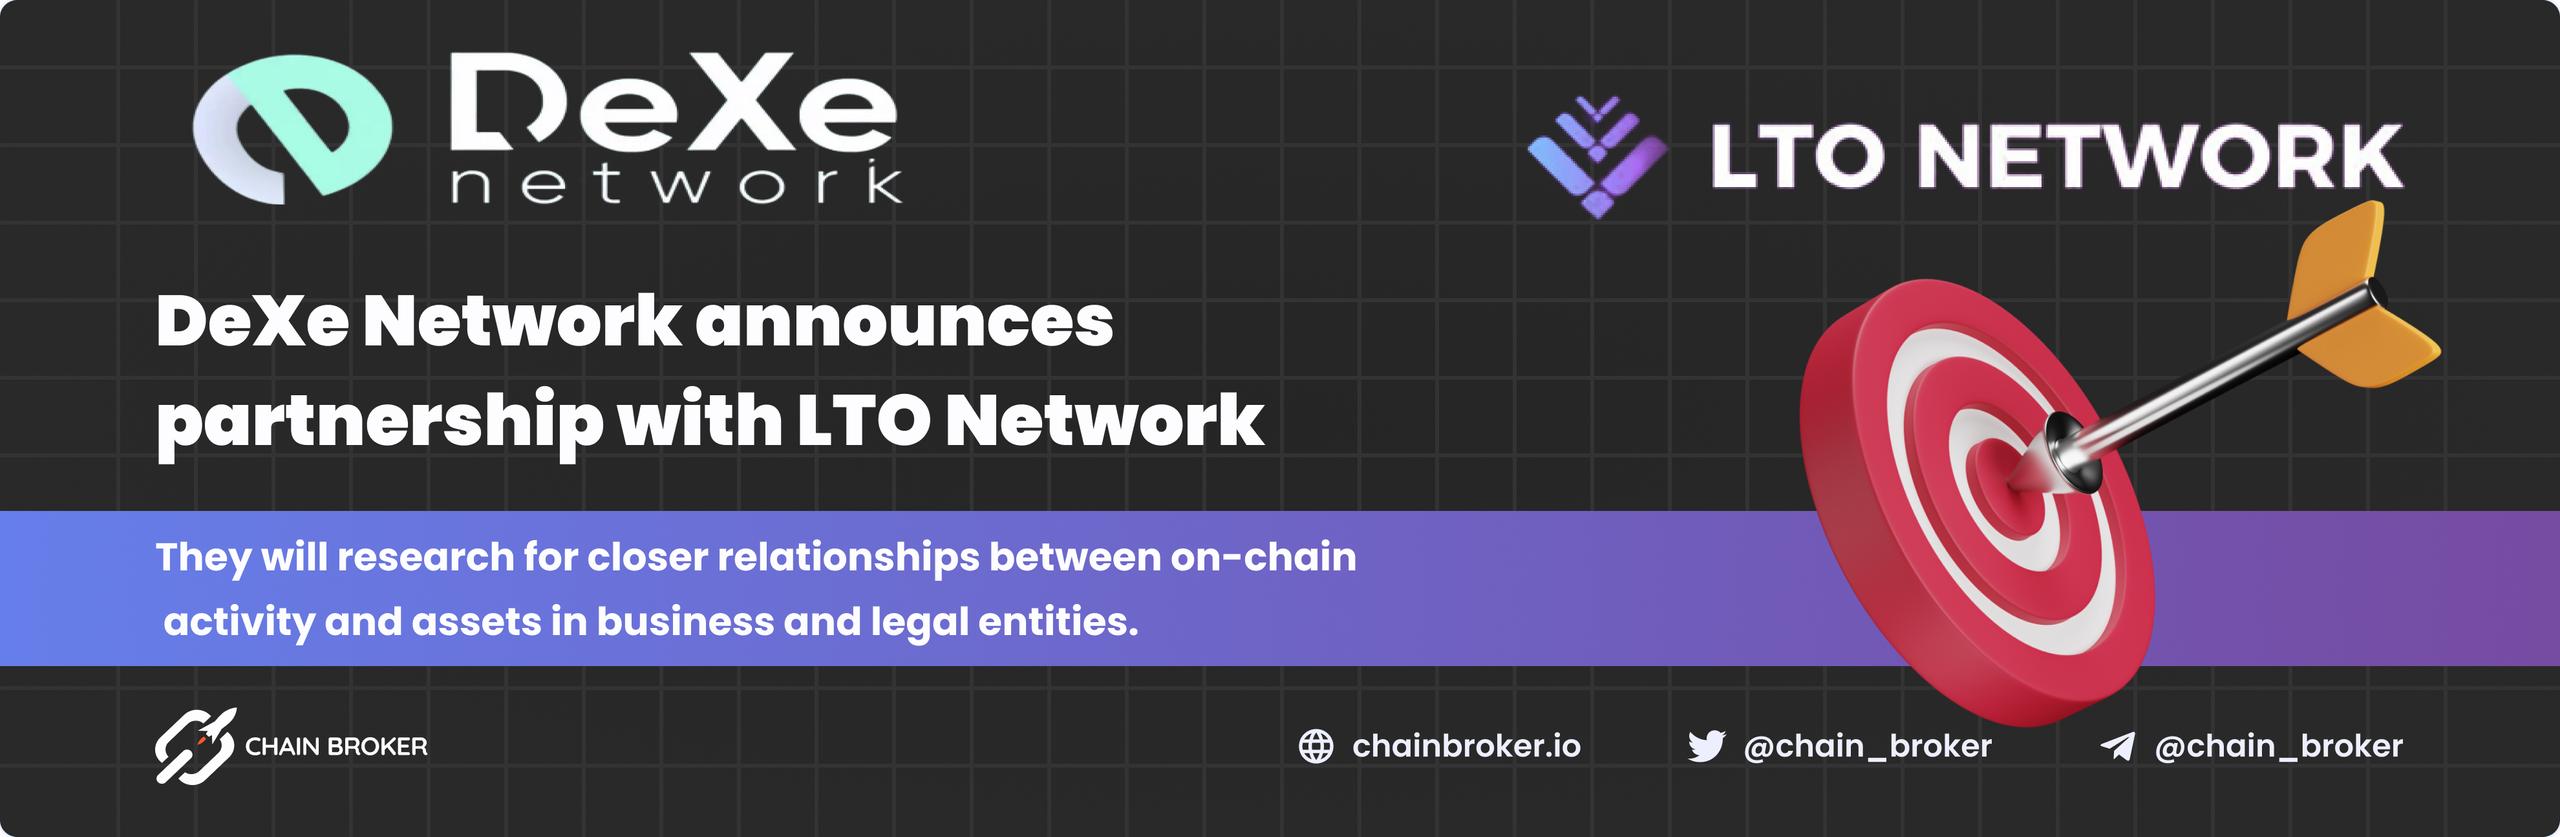 DeXe Network has announced partnership with LTO Network.